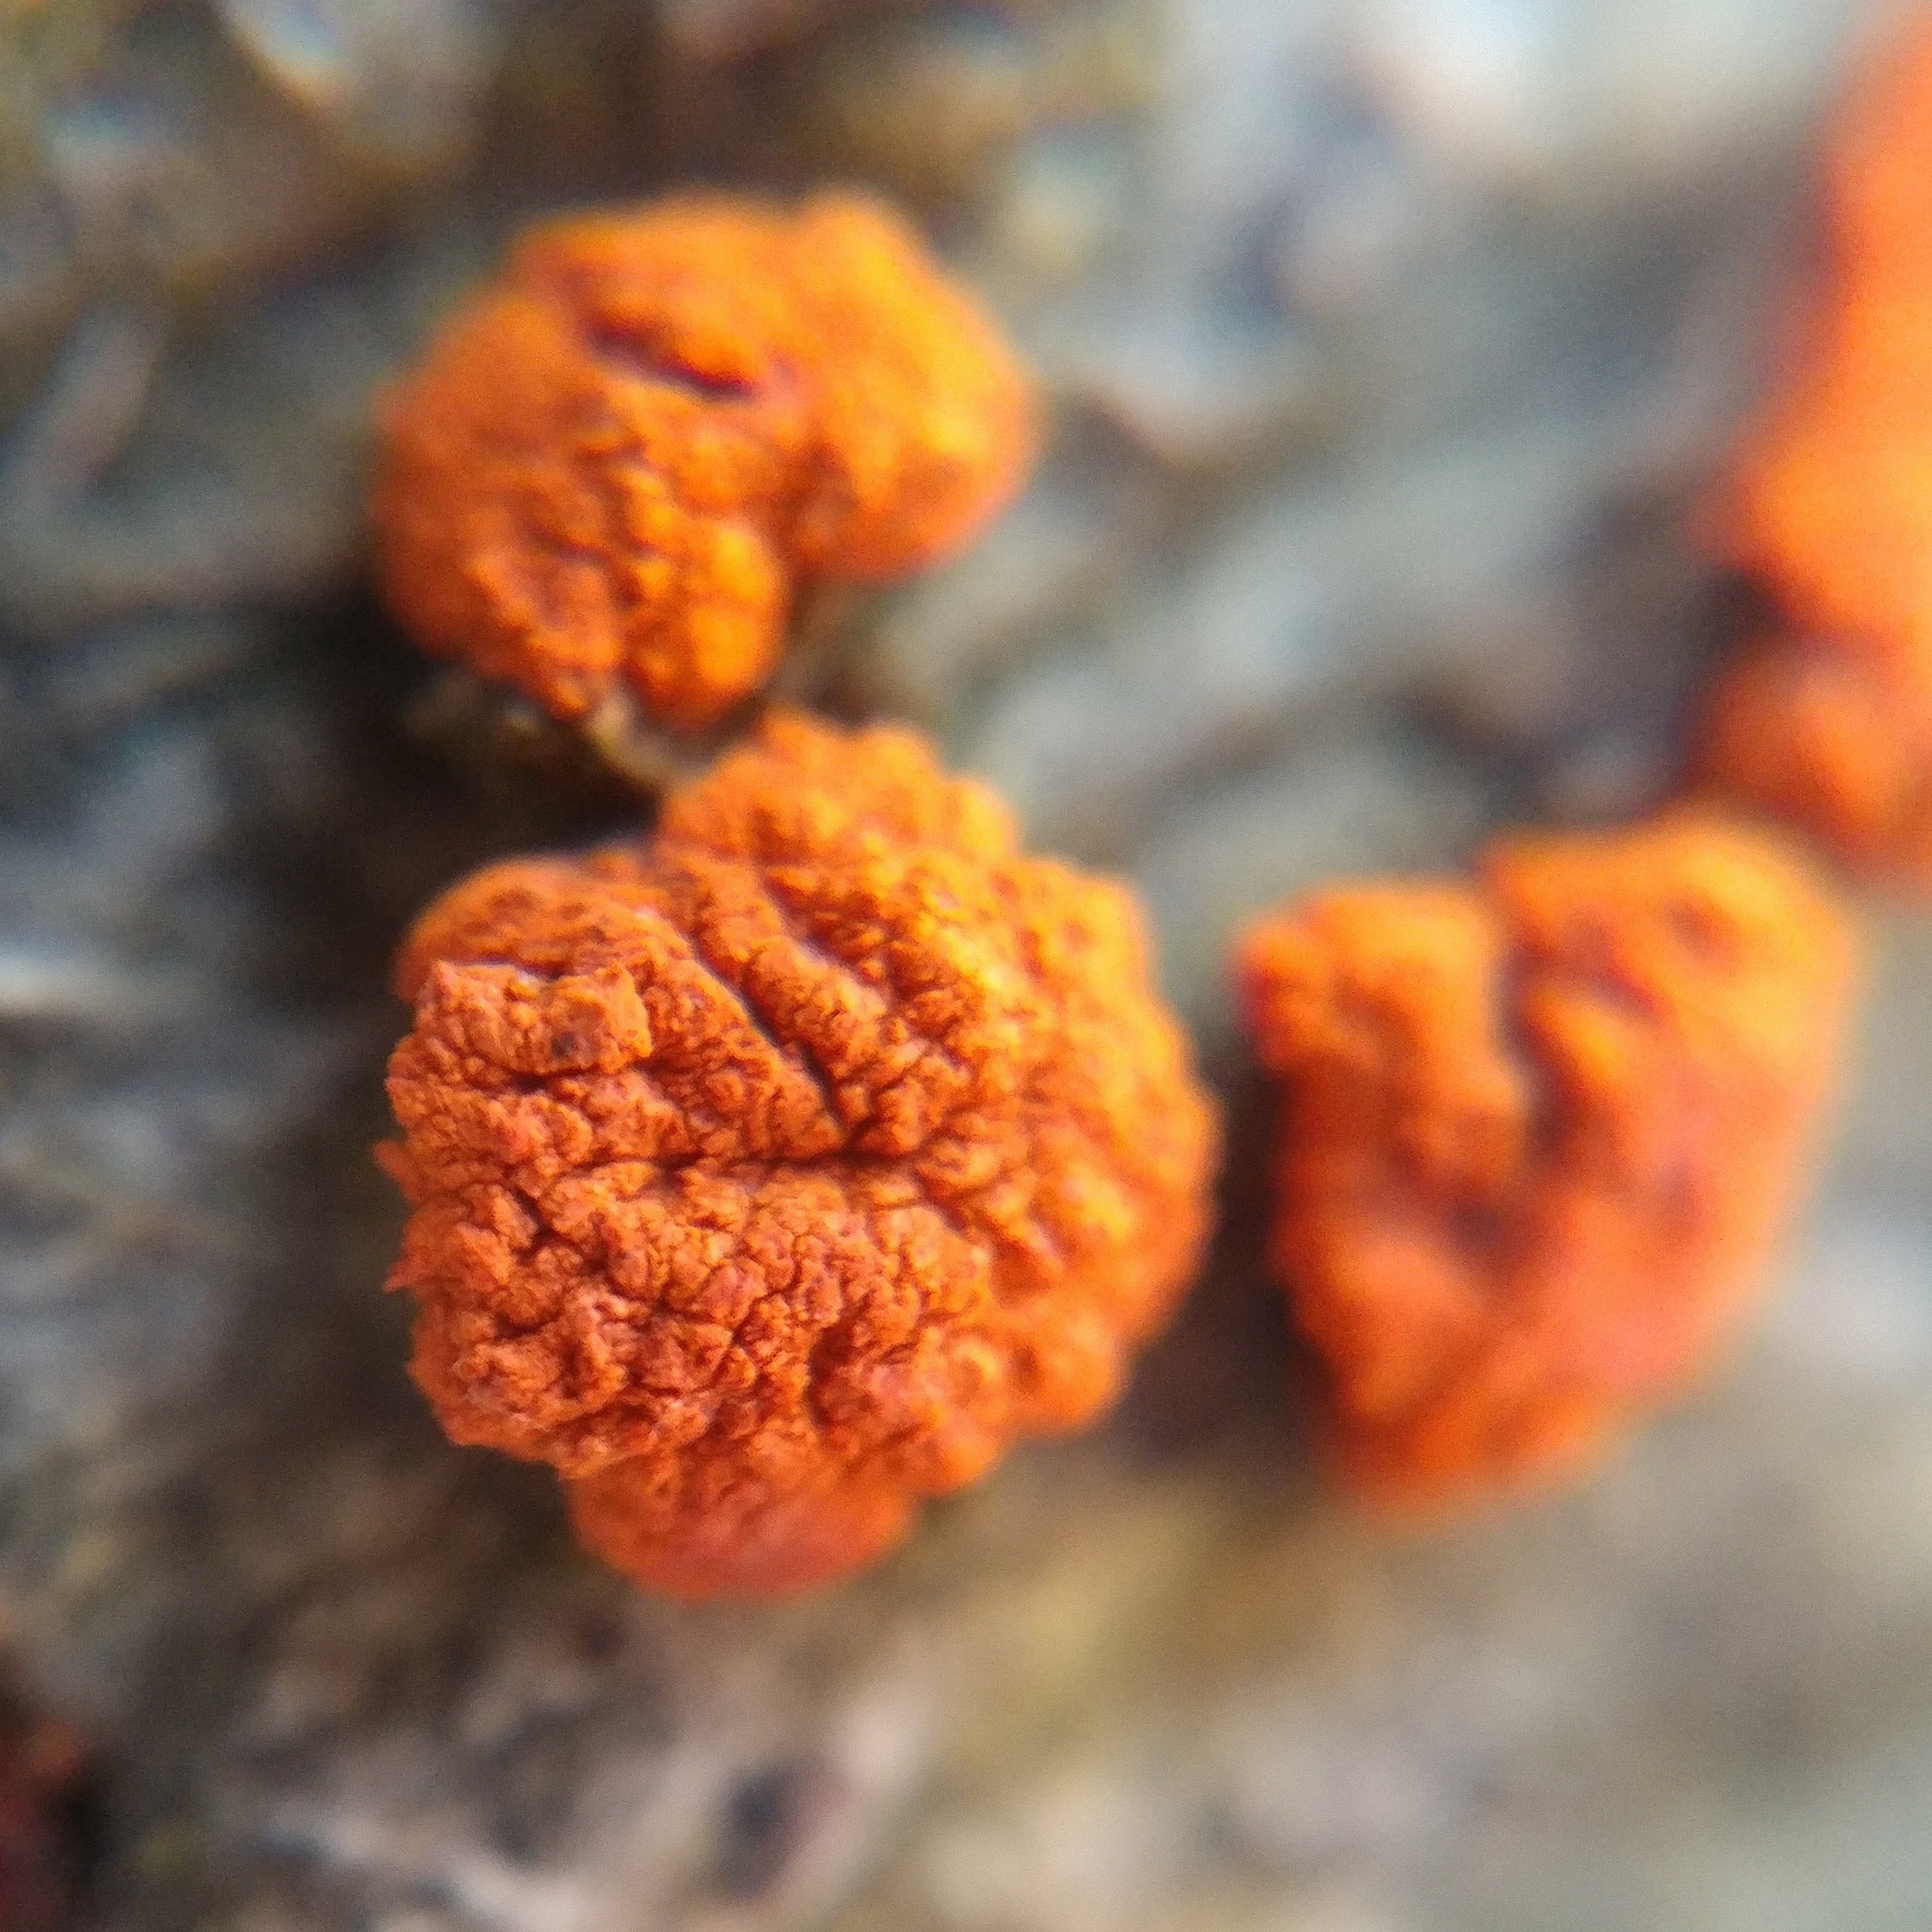 A 24x zoomed in shot on a fallen beech tree showing a symptom of beech bark disease; these orange spore carrying perithecia of the fungus Neonectria faginata.

#FindingtheUniverse